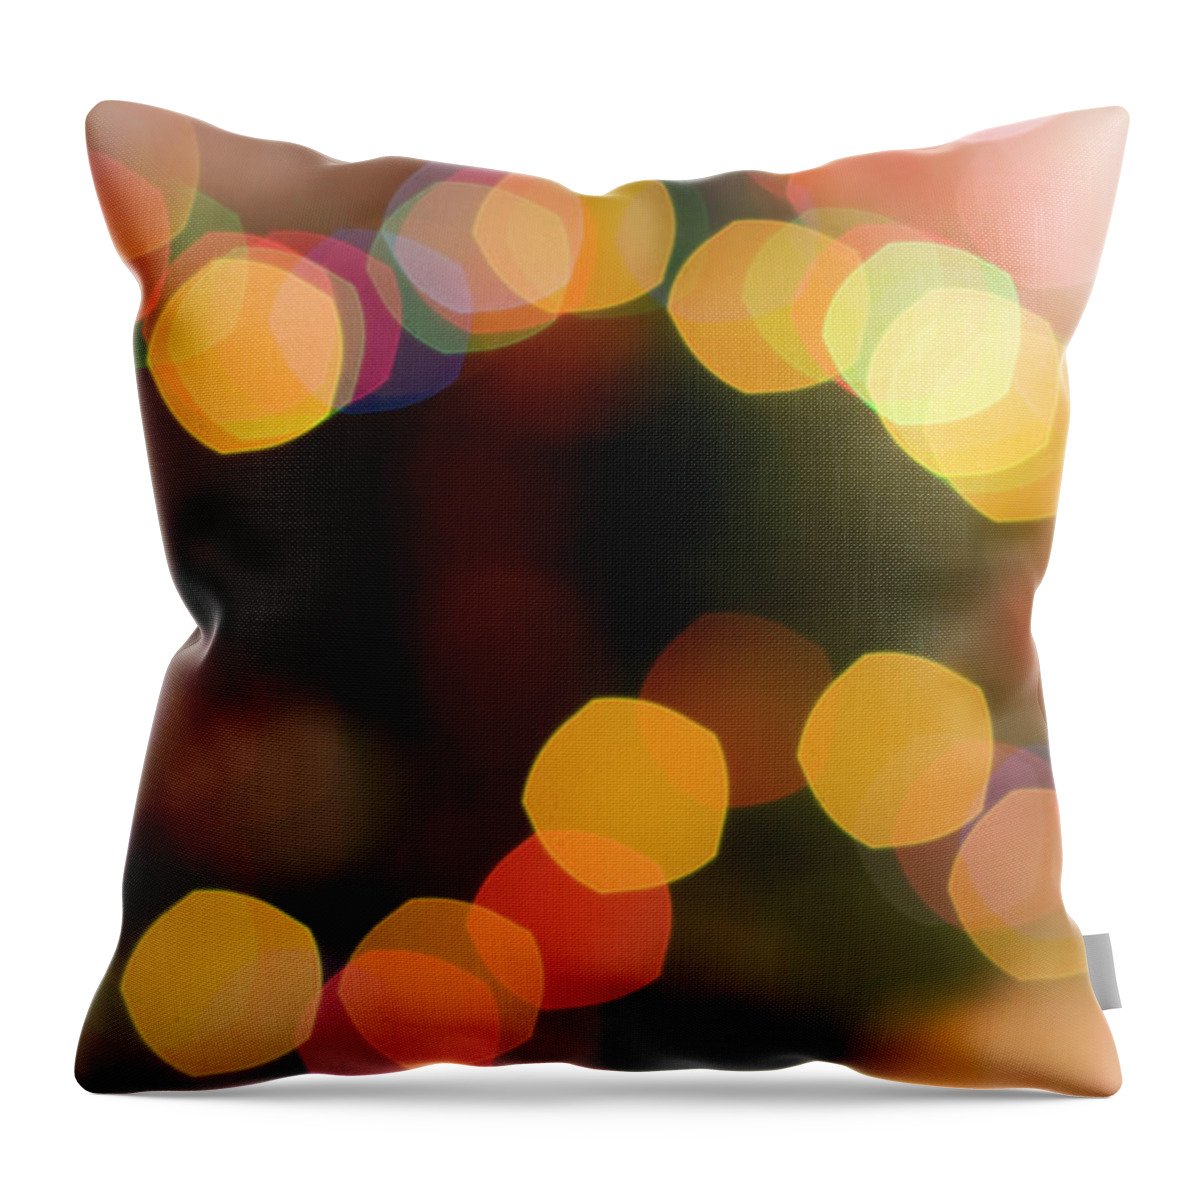 Funky Throw Pillow featuring the photograph Christmas Tree Lights by Lloret